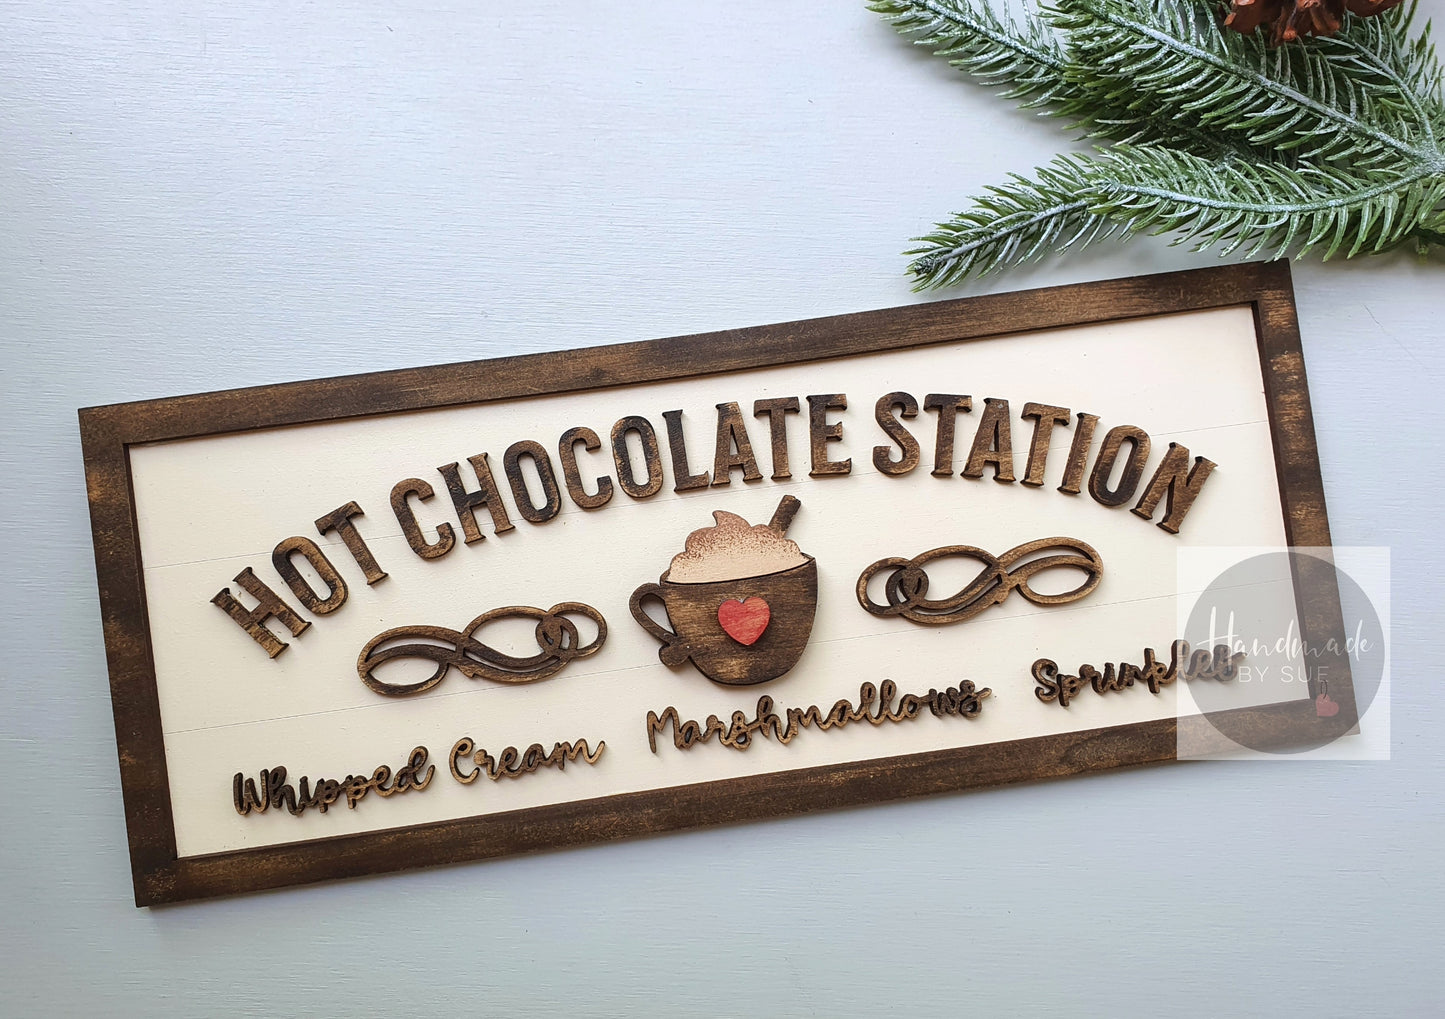 Hot Chocolate Station Rustic Style Sign